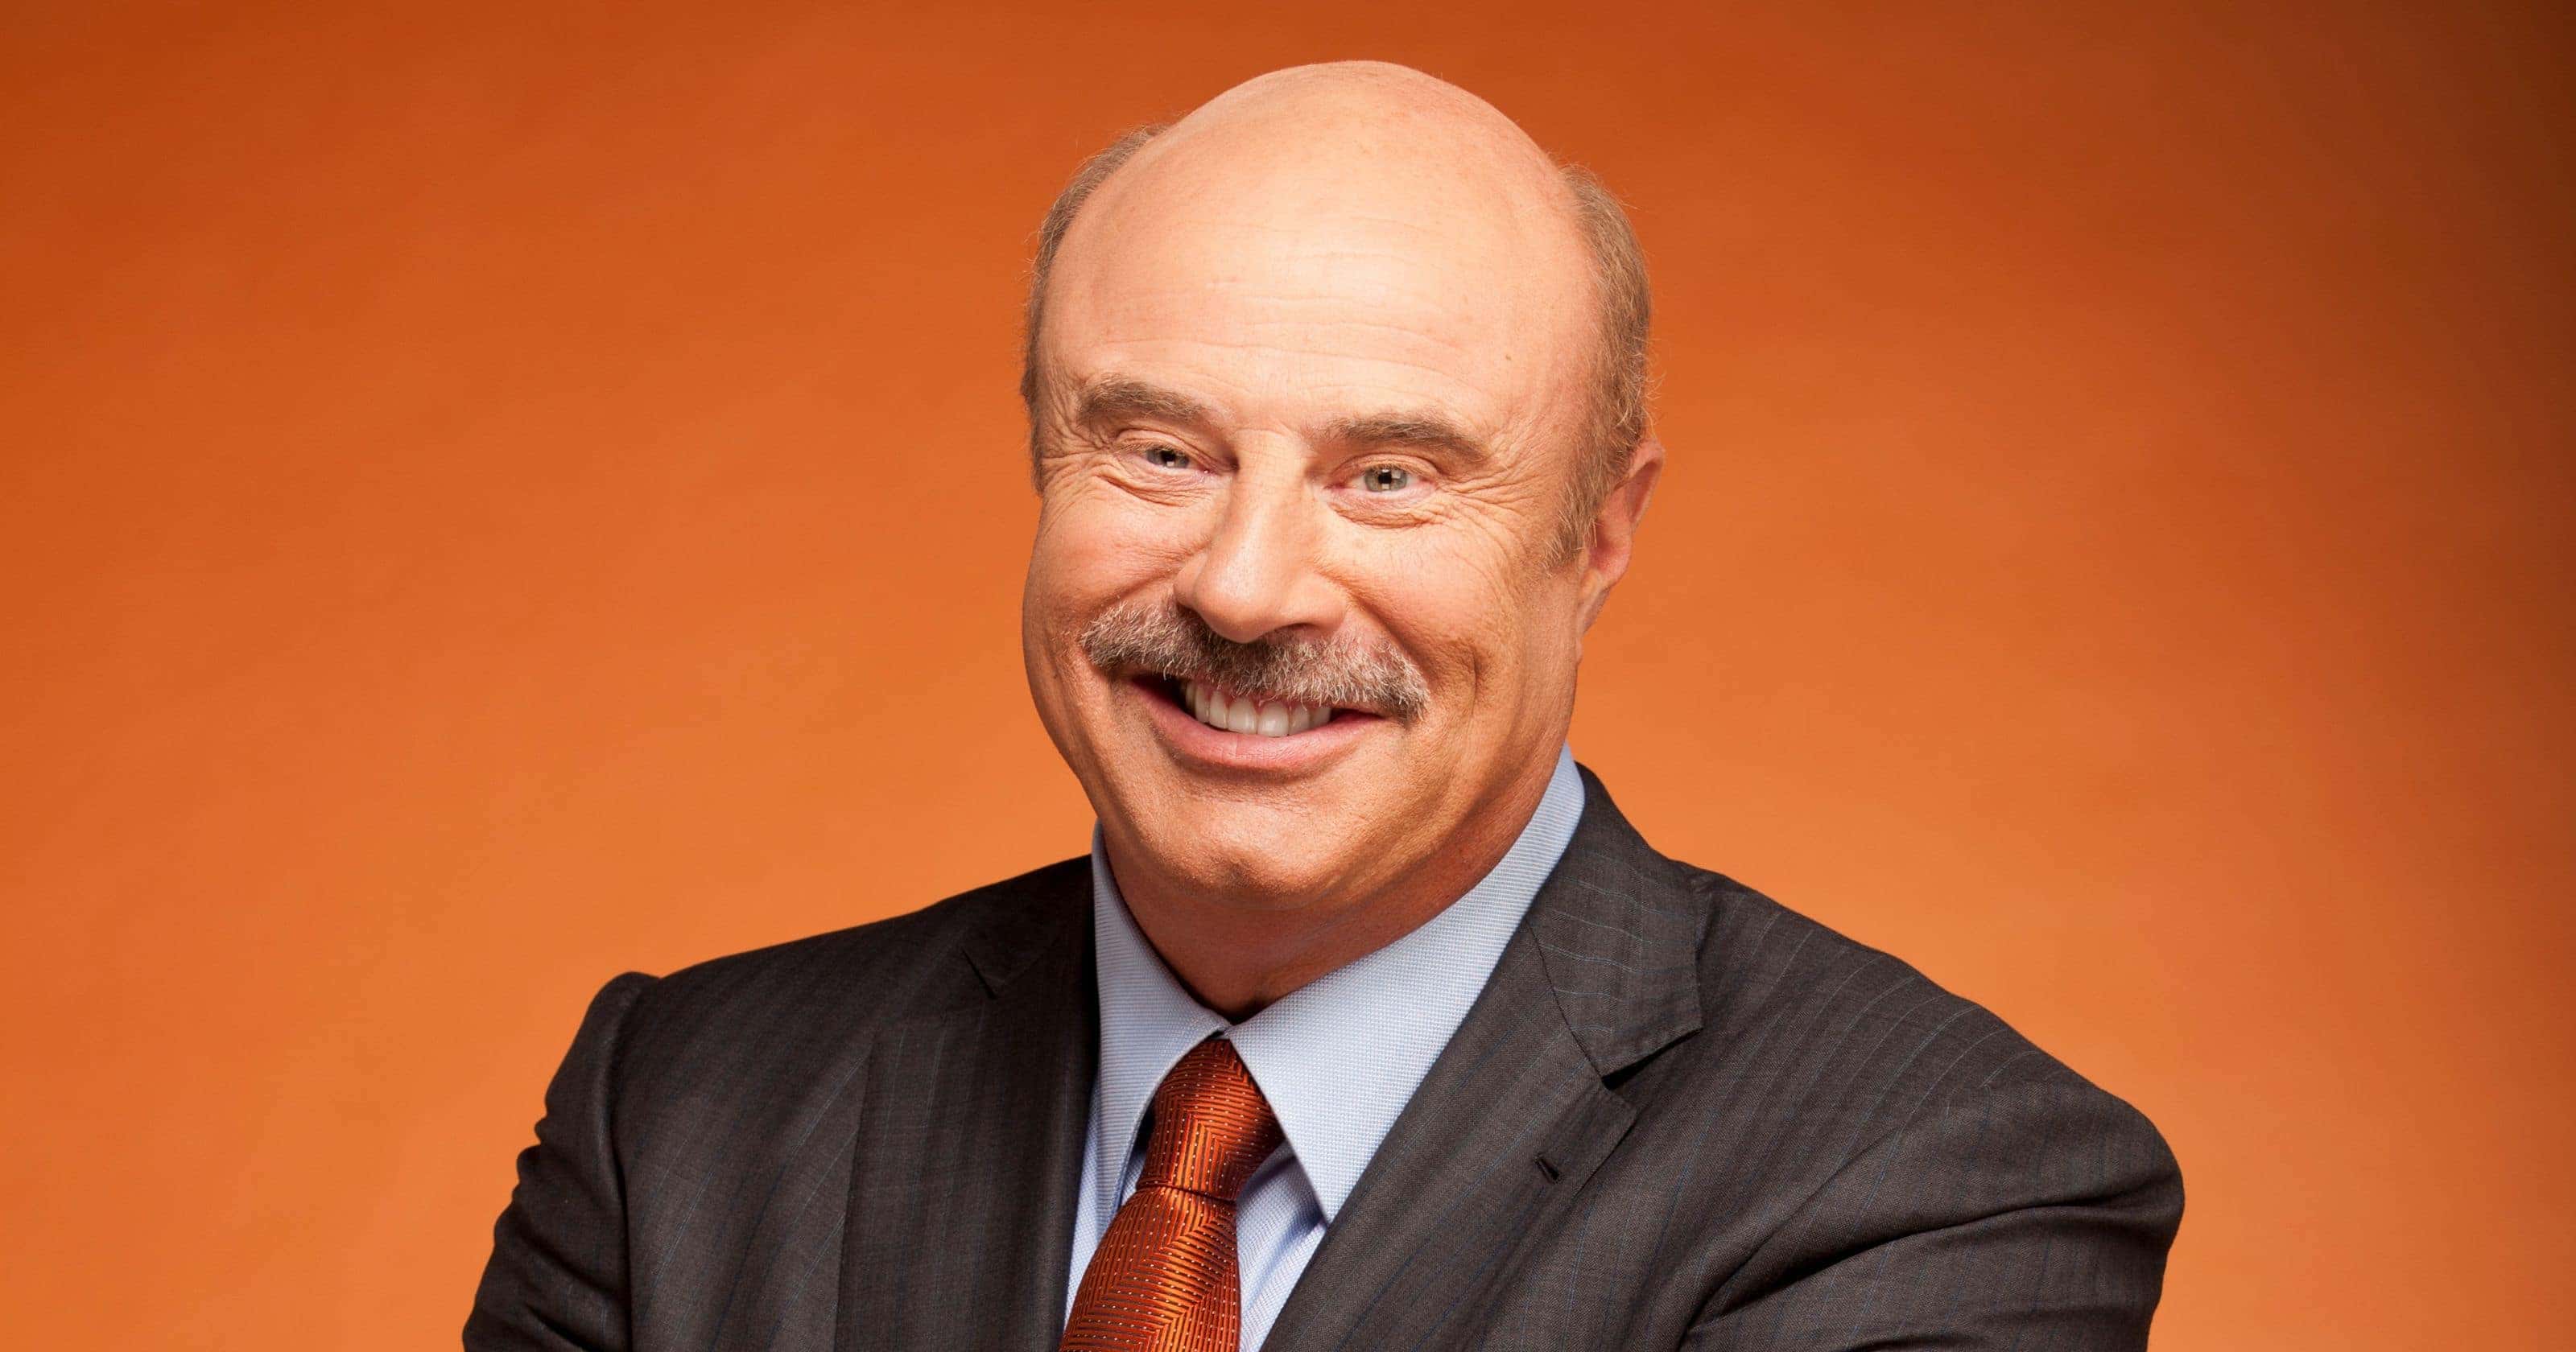 30 Behind-the-Scenes Facts about Dr. Phil.